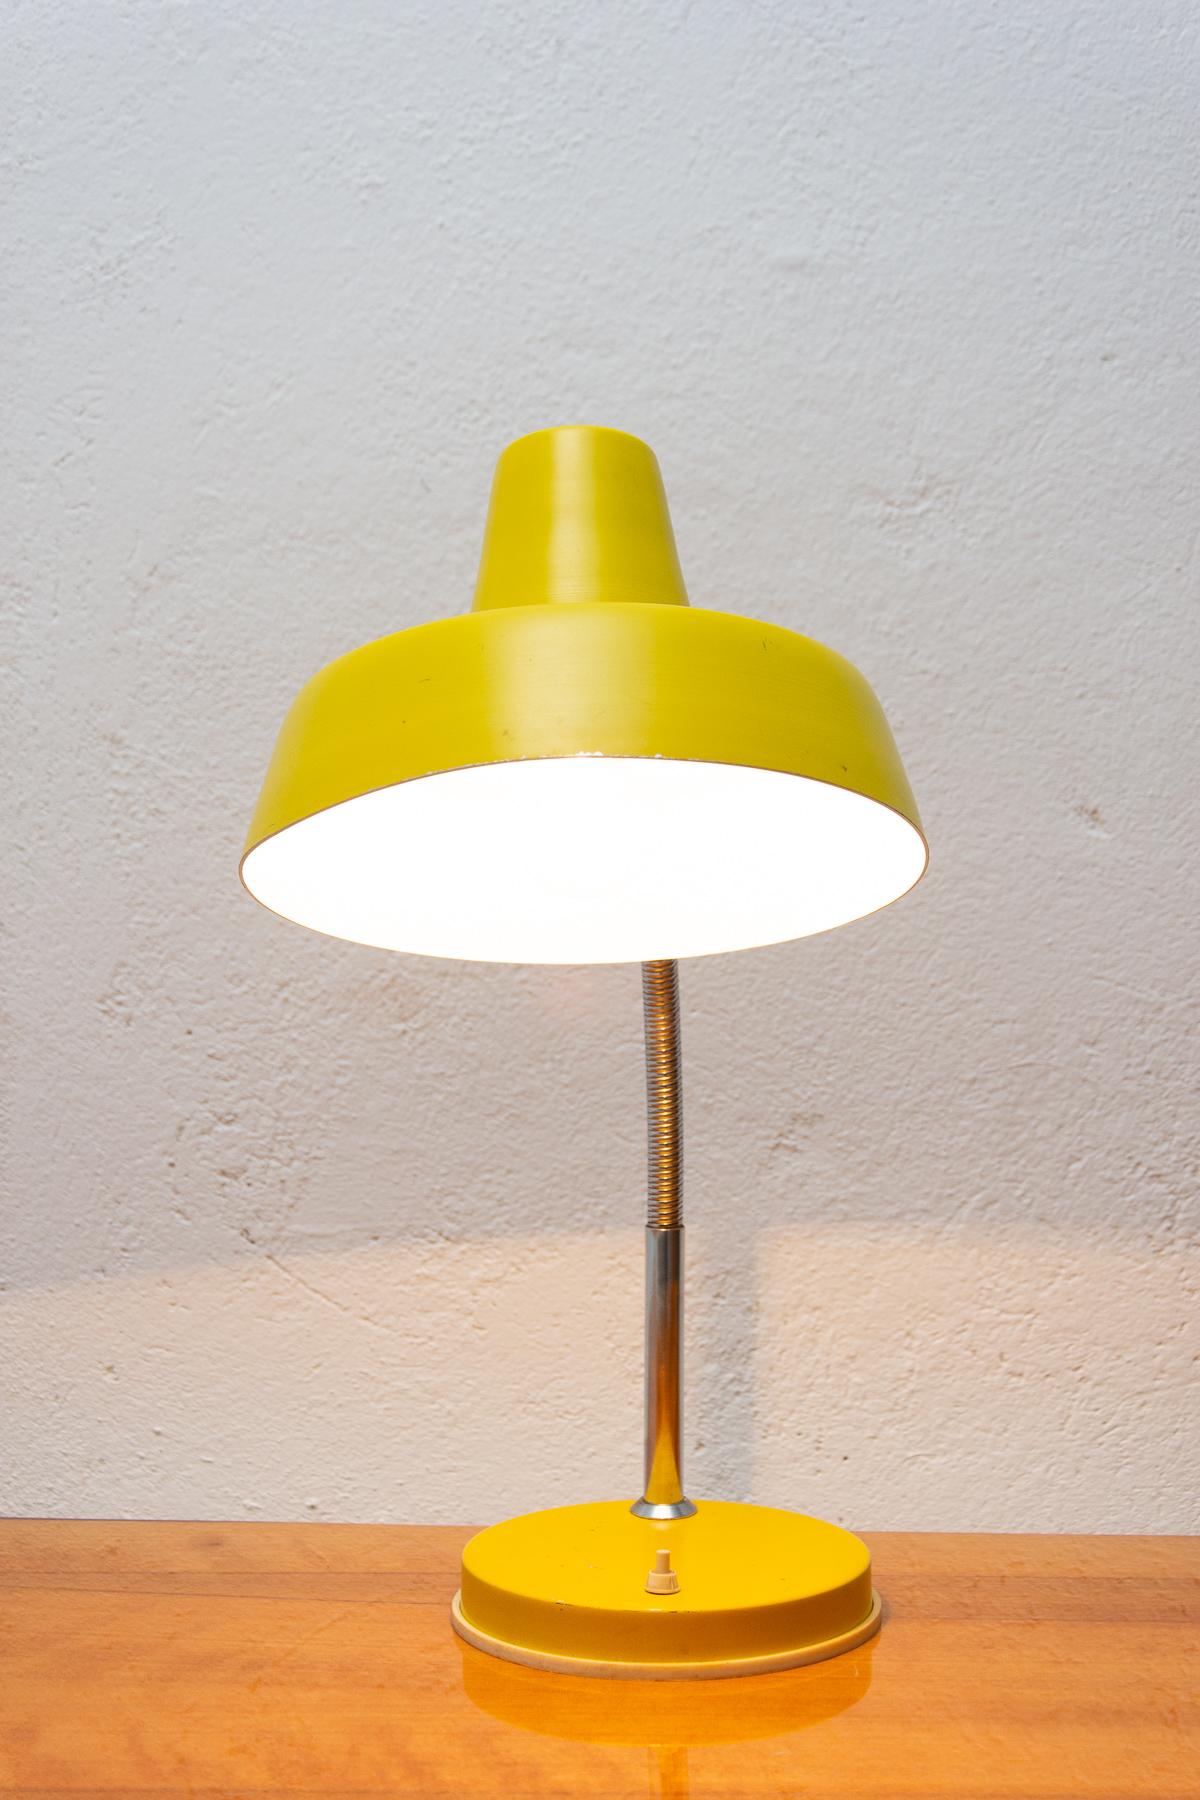 This lamp was made in the 1950s in the Central Europe.

It has a plastic shade; chrome adjustable gooseneck supports on yellow plastic base with a push-button switch. It has a new wiring.

Works on one bulb E27, European plug. In very good